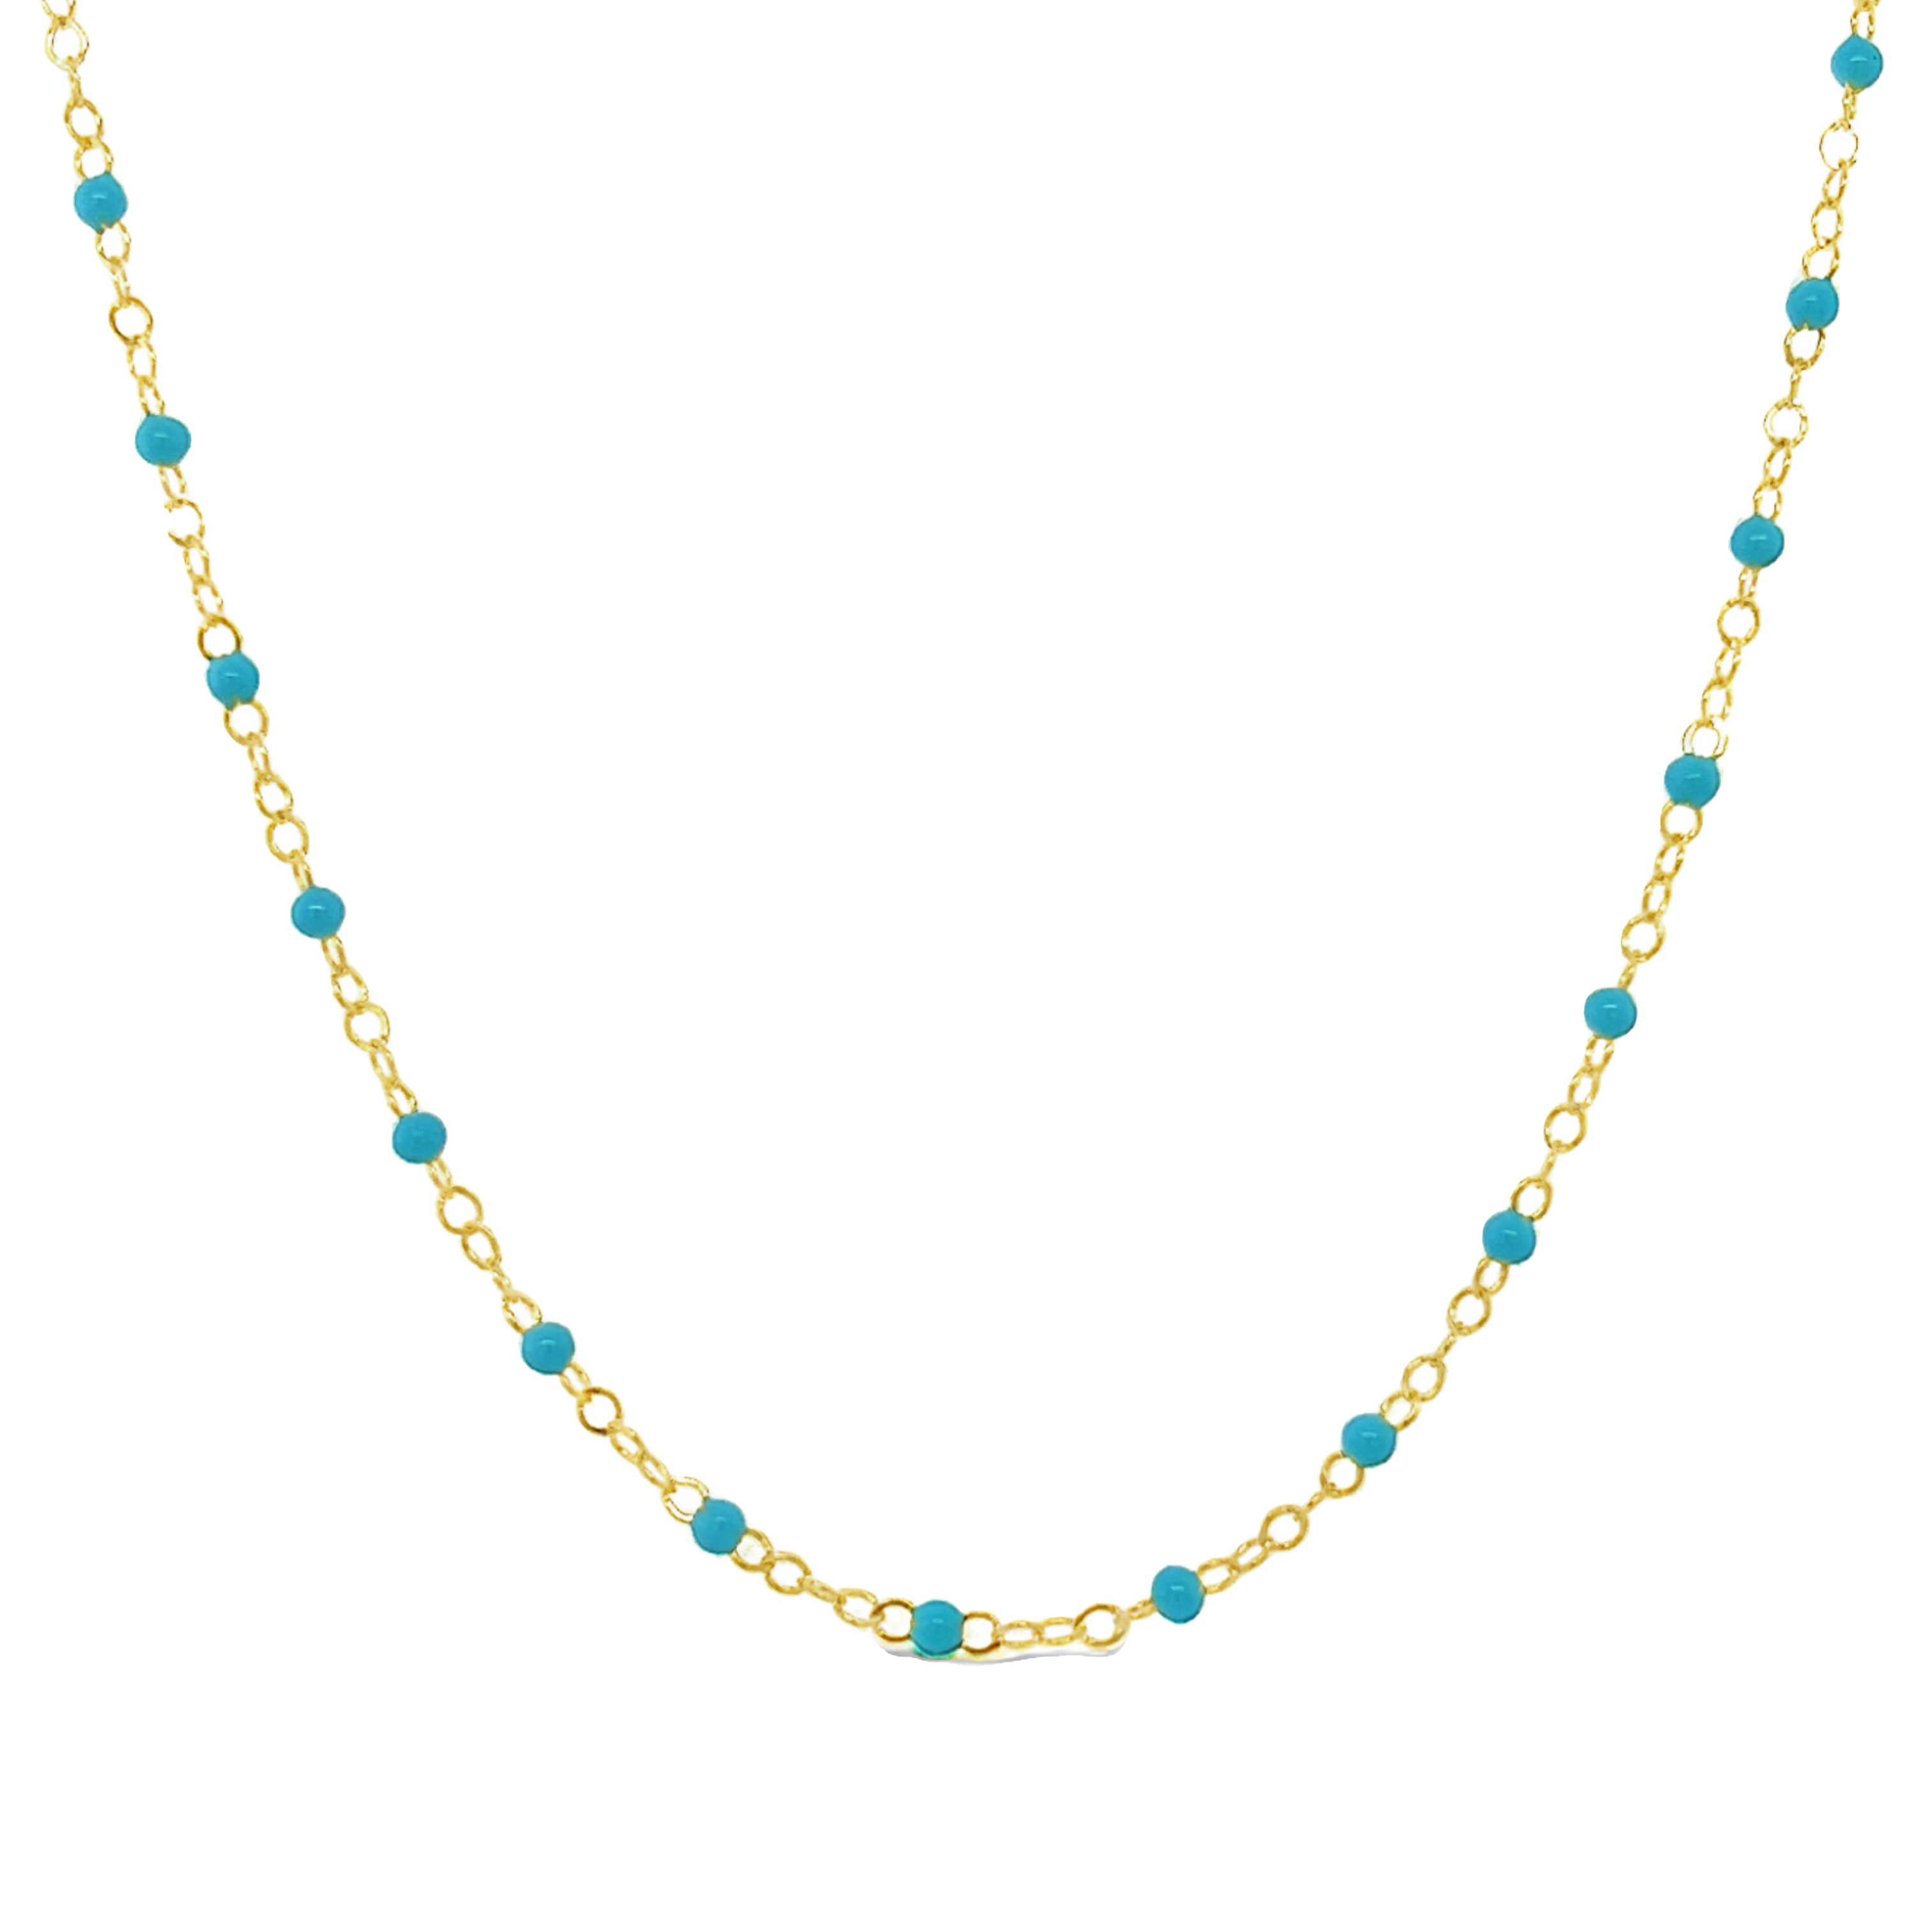 14 Karat yellow gold necklace with turquoise enamel beads